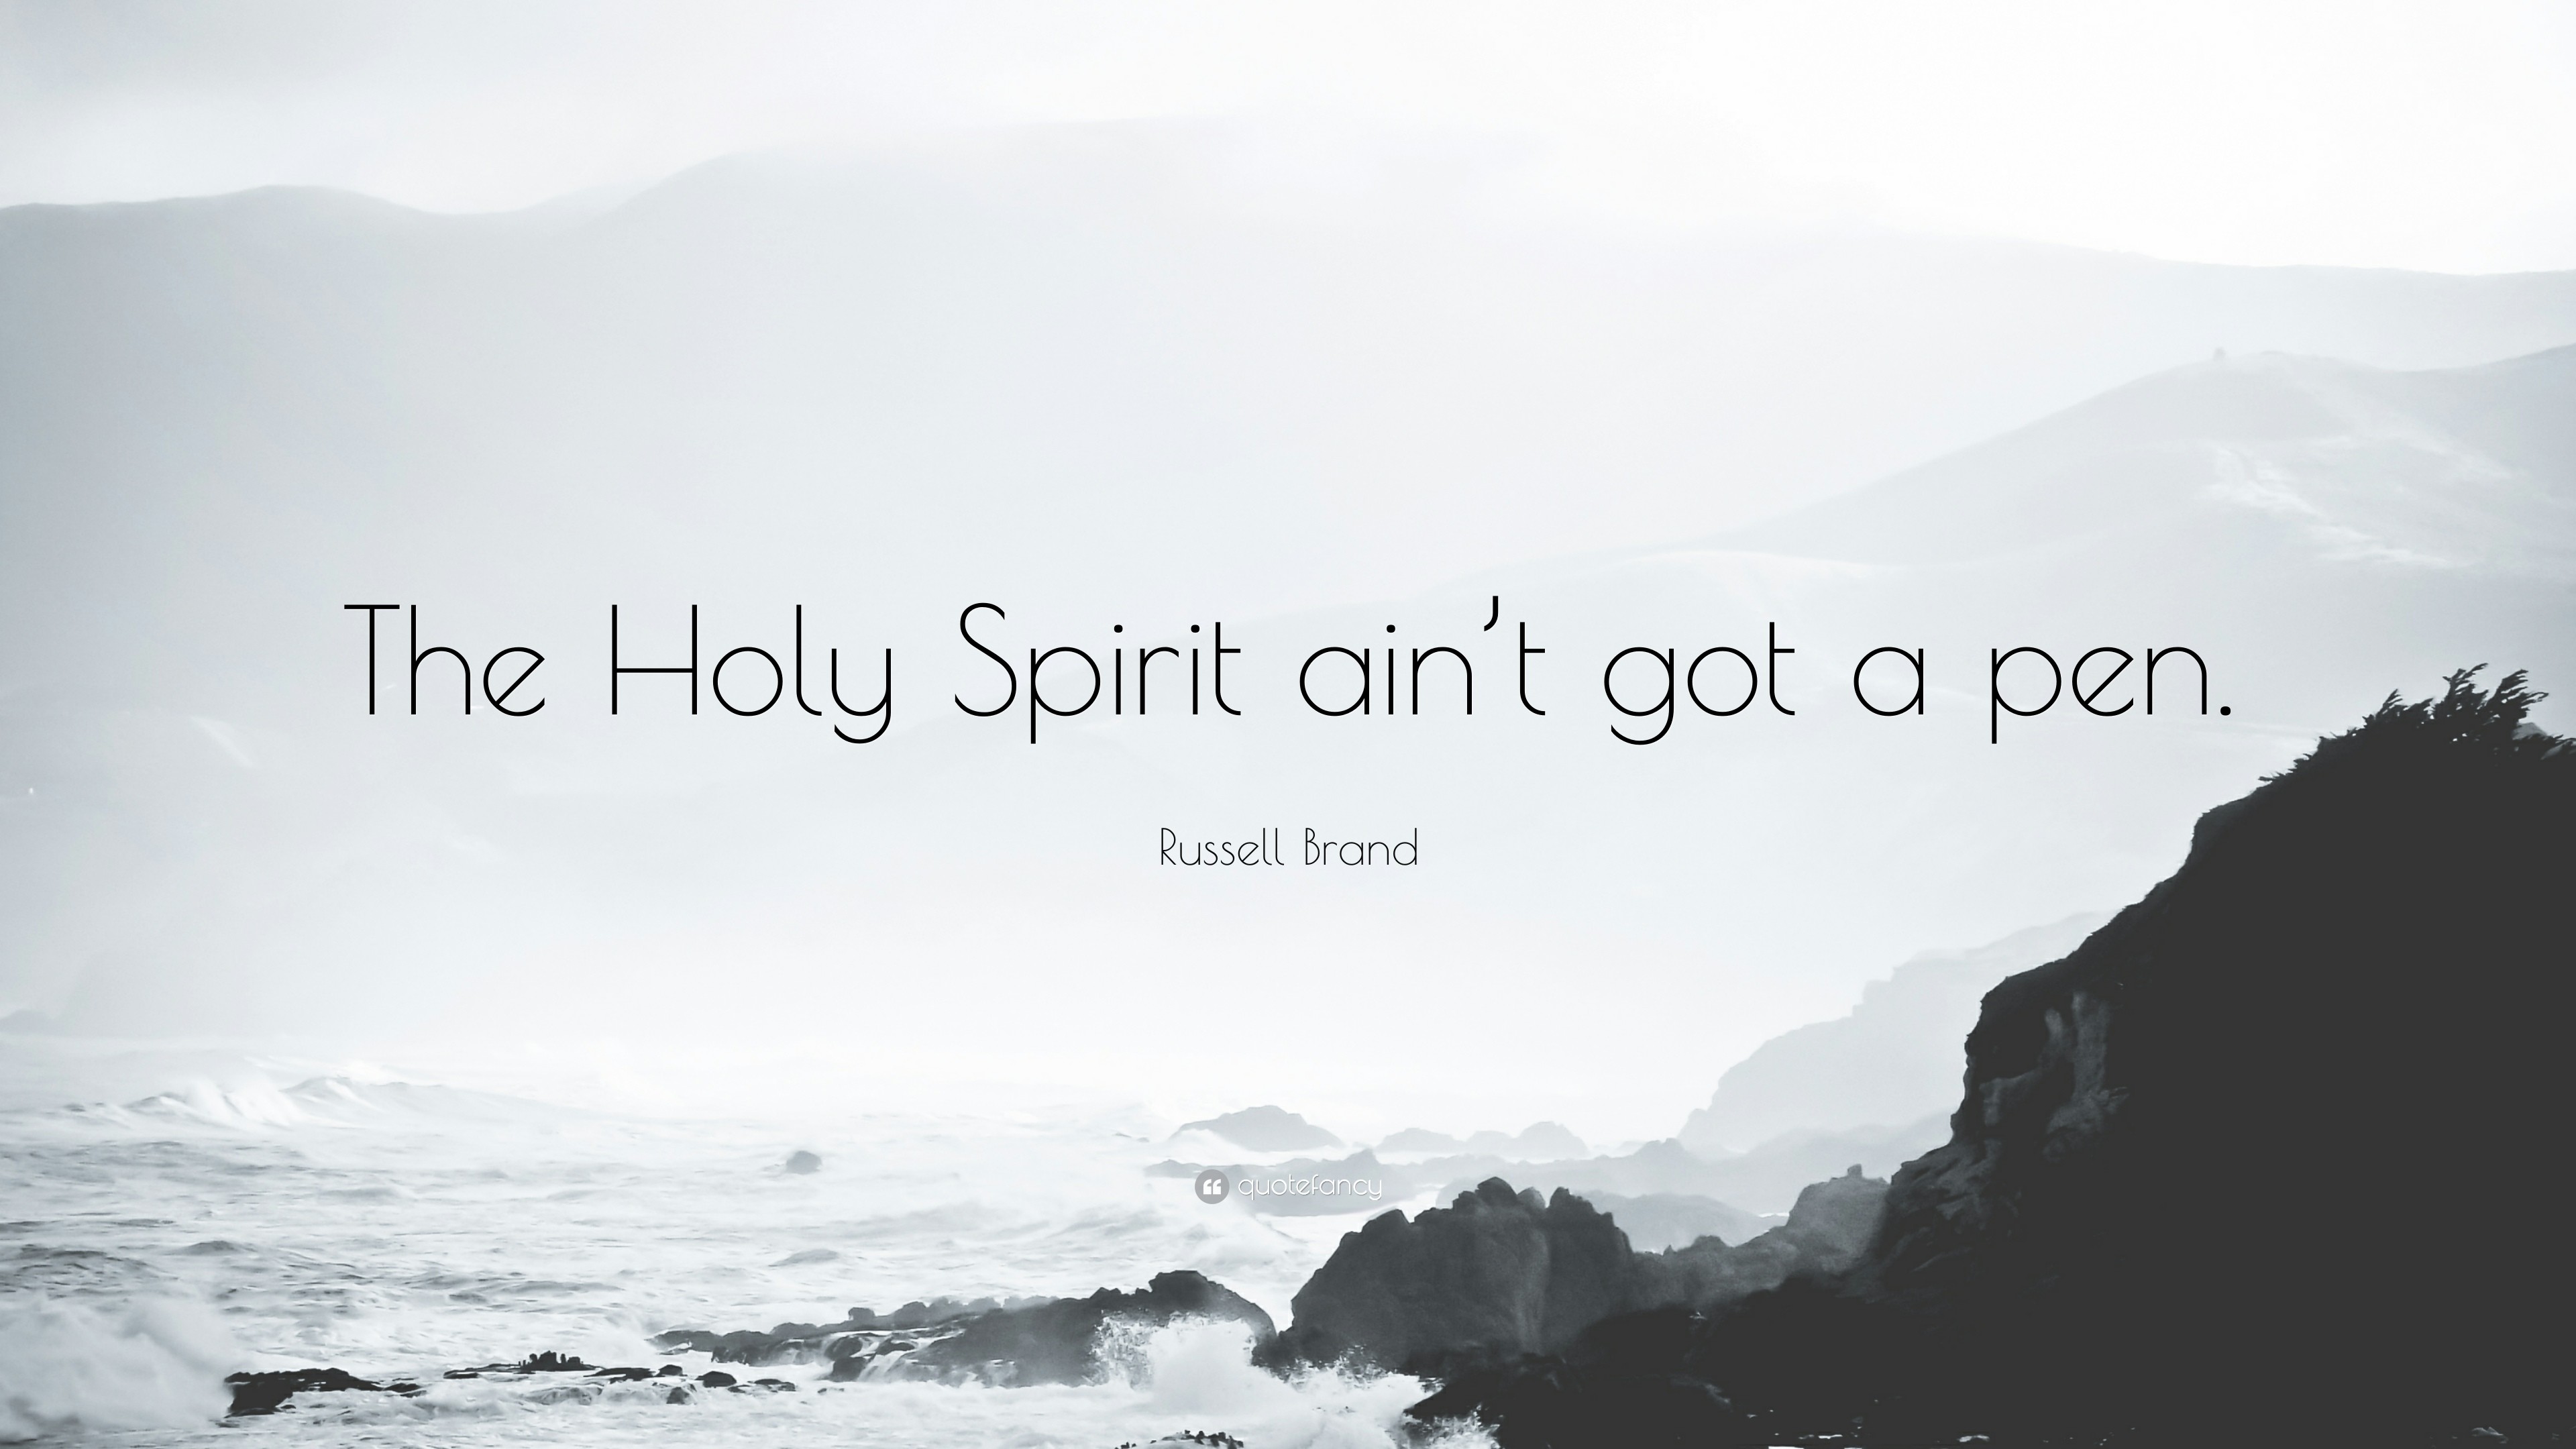 3840x2160 Russell Brand Quote: “The Holy Spirit ain't got a pen.”